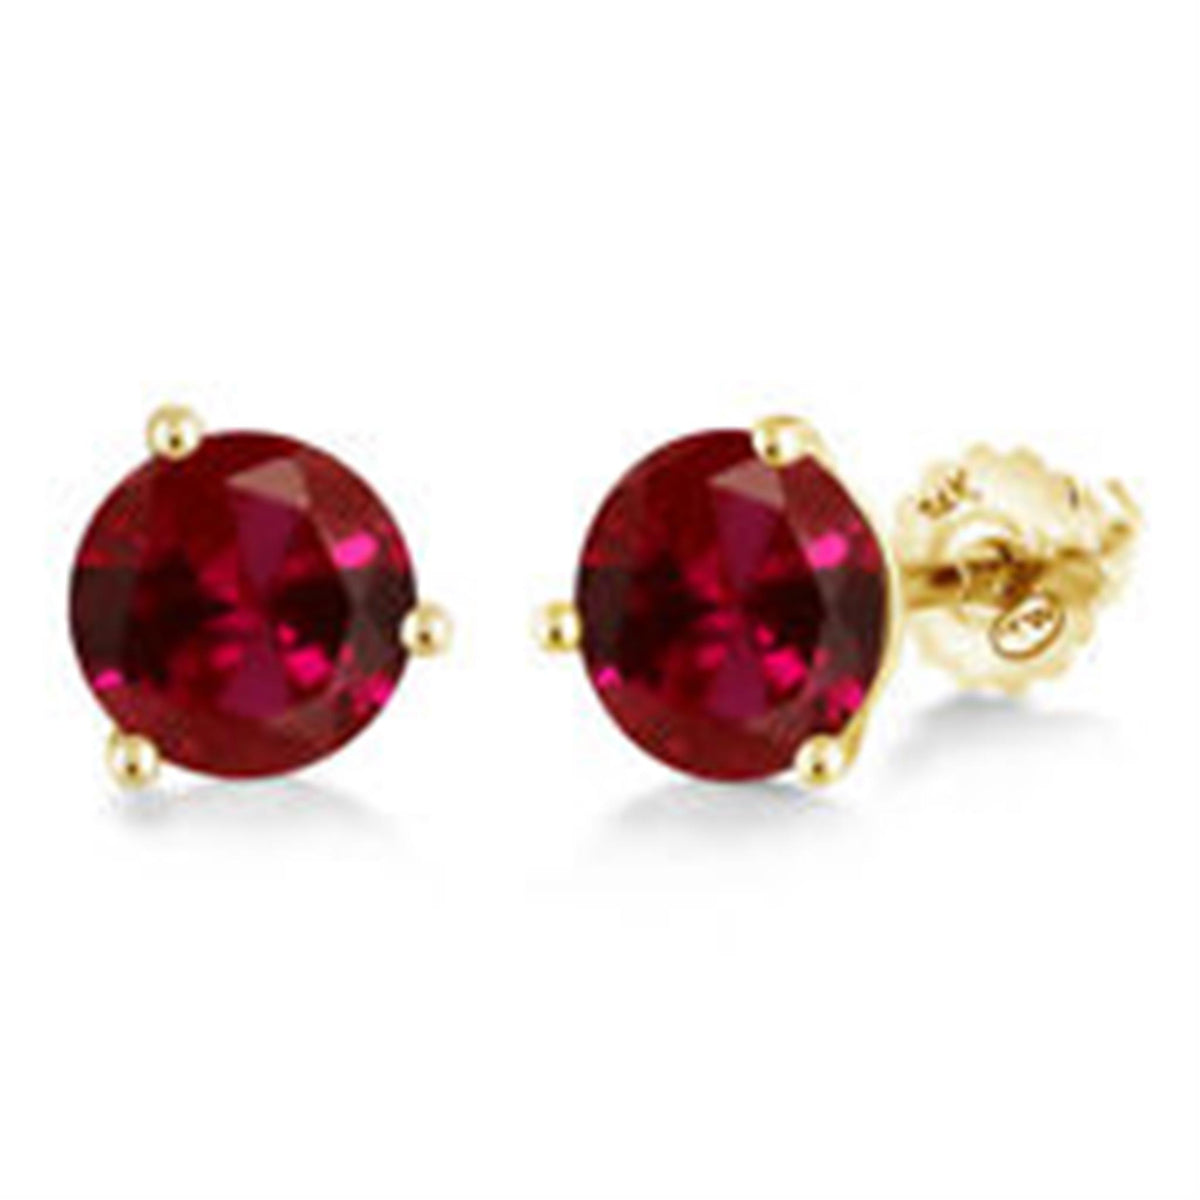 14Kt Yellow Gold Martini Stud Earrings With 1.40cttw Chatham Ruby